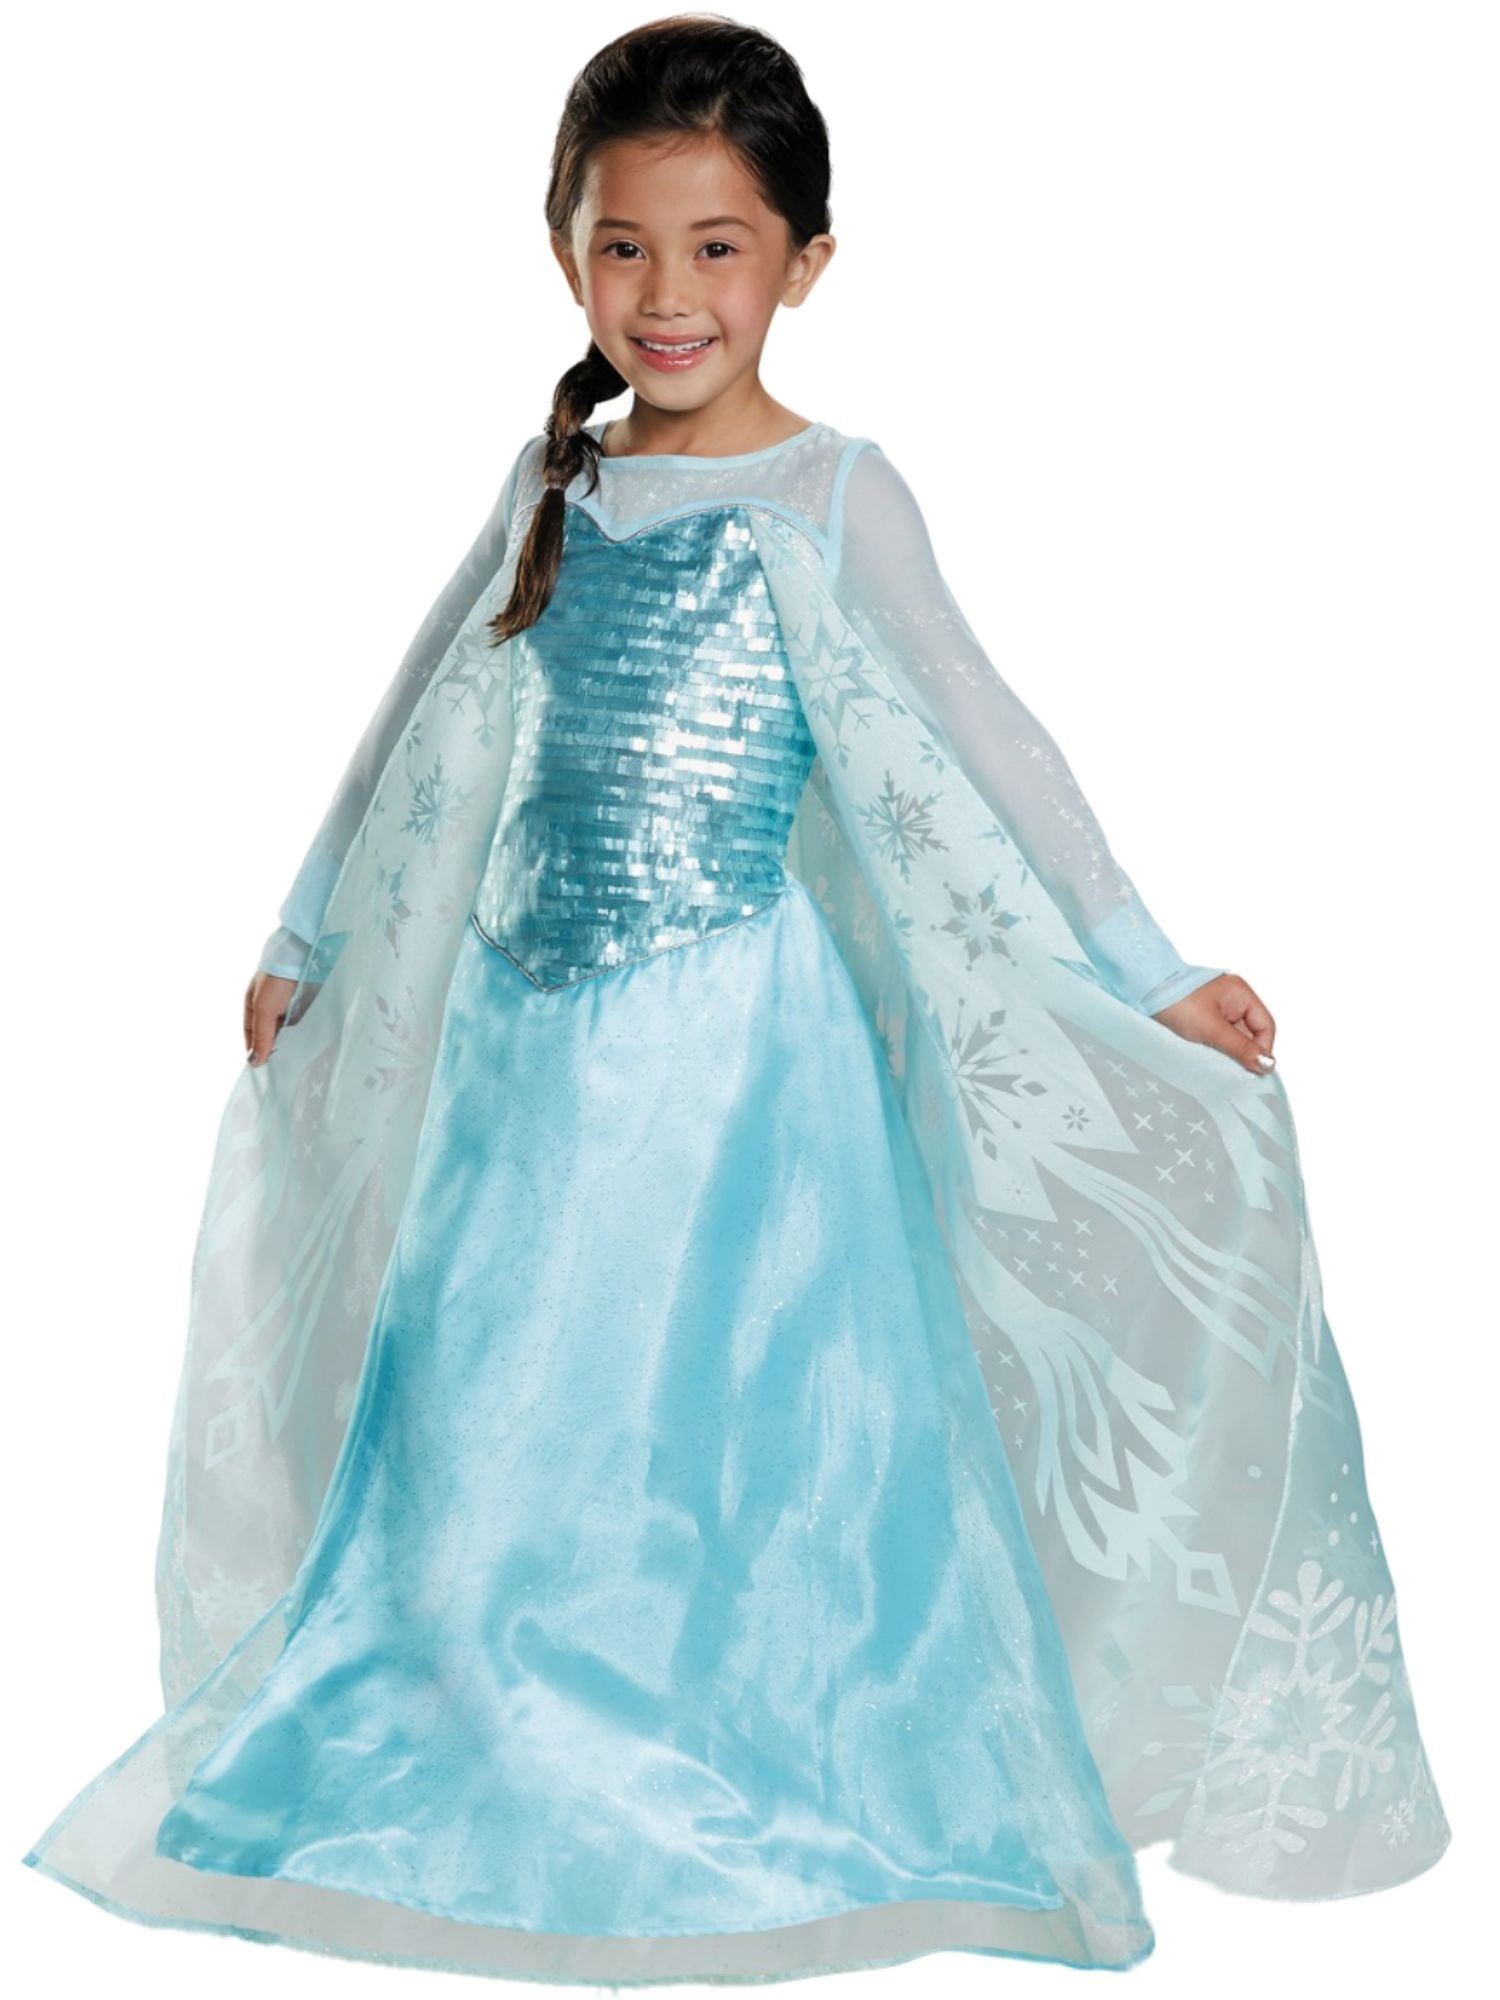 NWT DISNEY STORE Frozen ELSA COSTUME DRESS Gown 5/6 7/8 Limited Edition Deluxe 